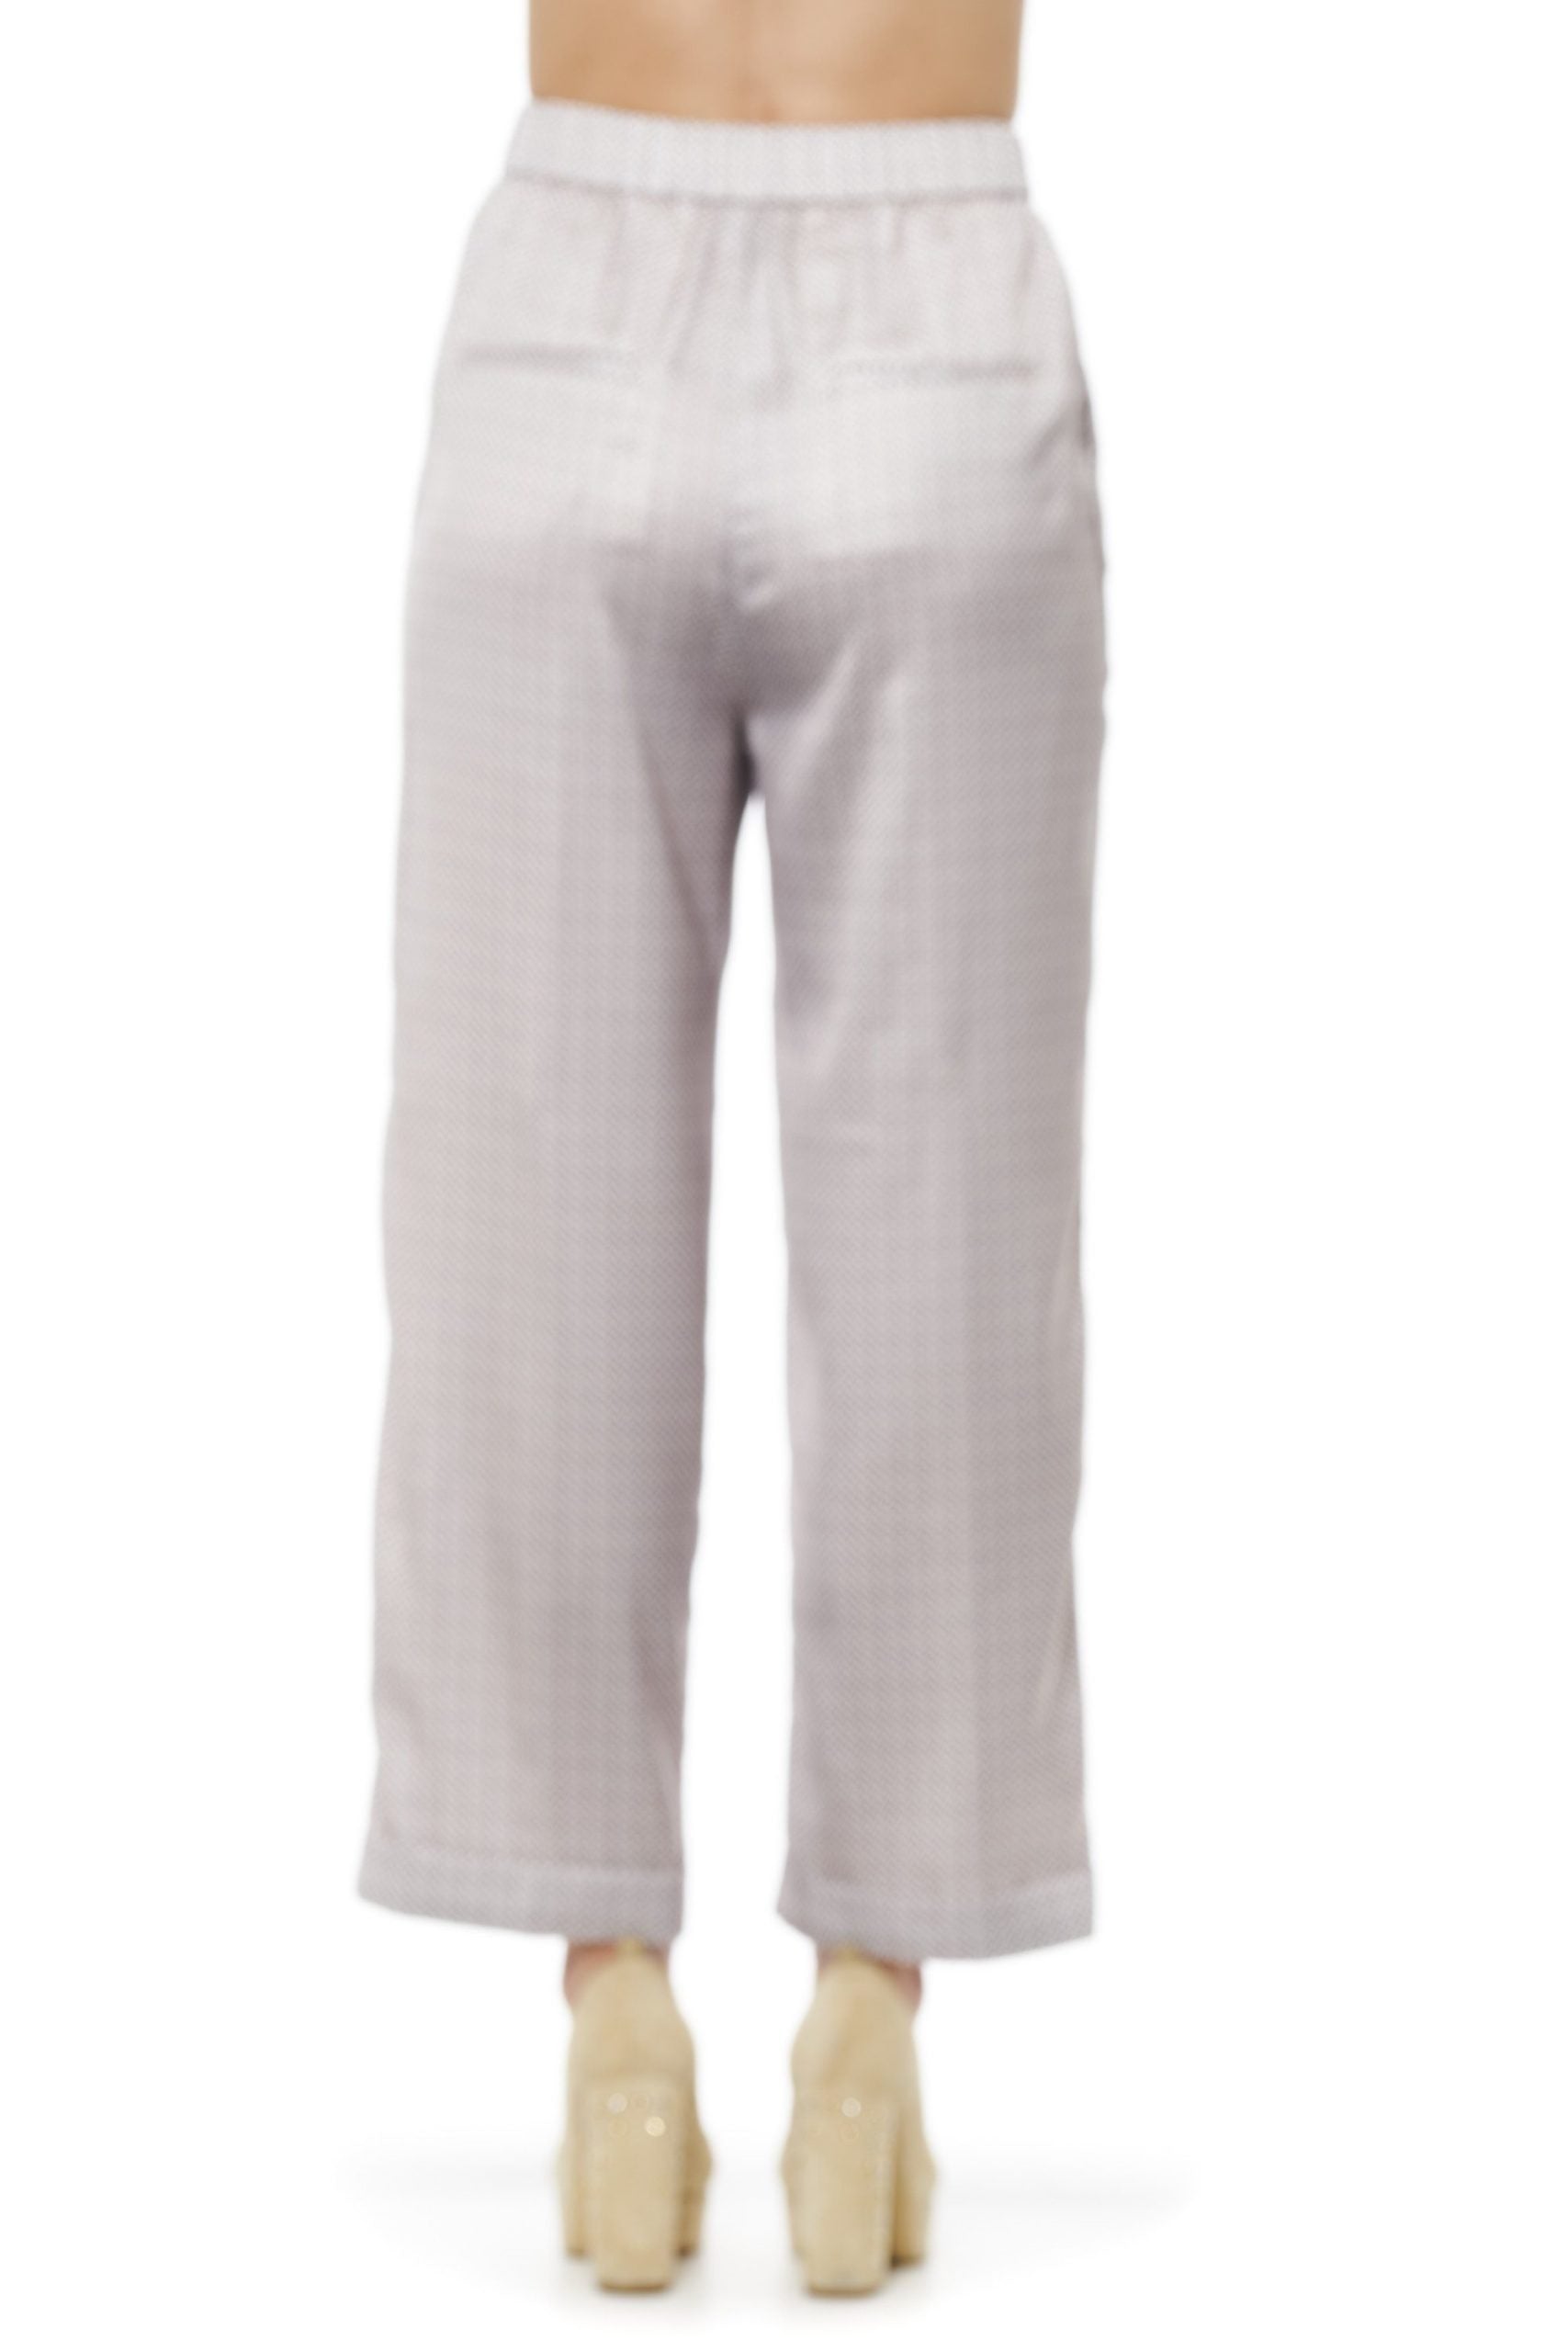 PESERICO High Waist Relaxed Fit Pant - White